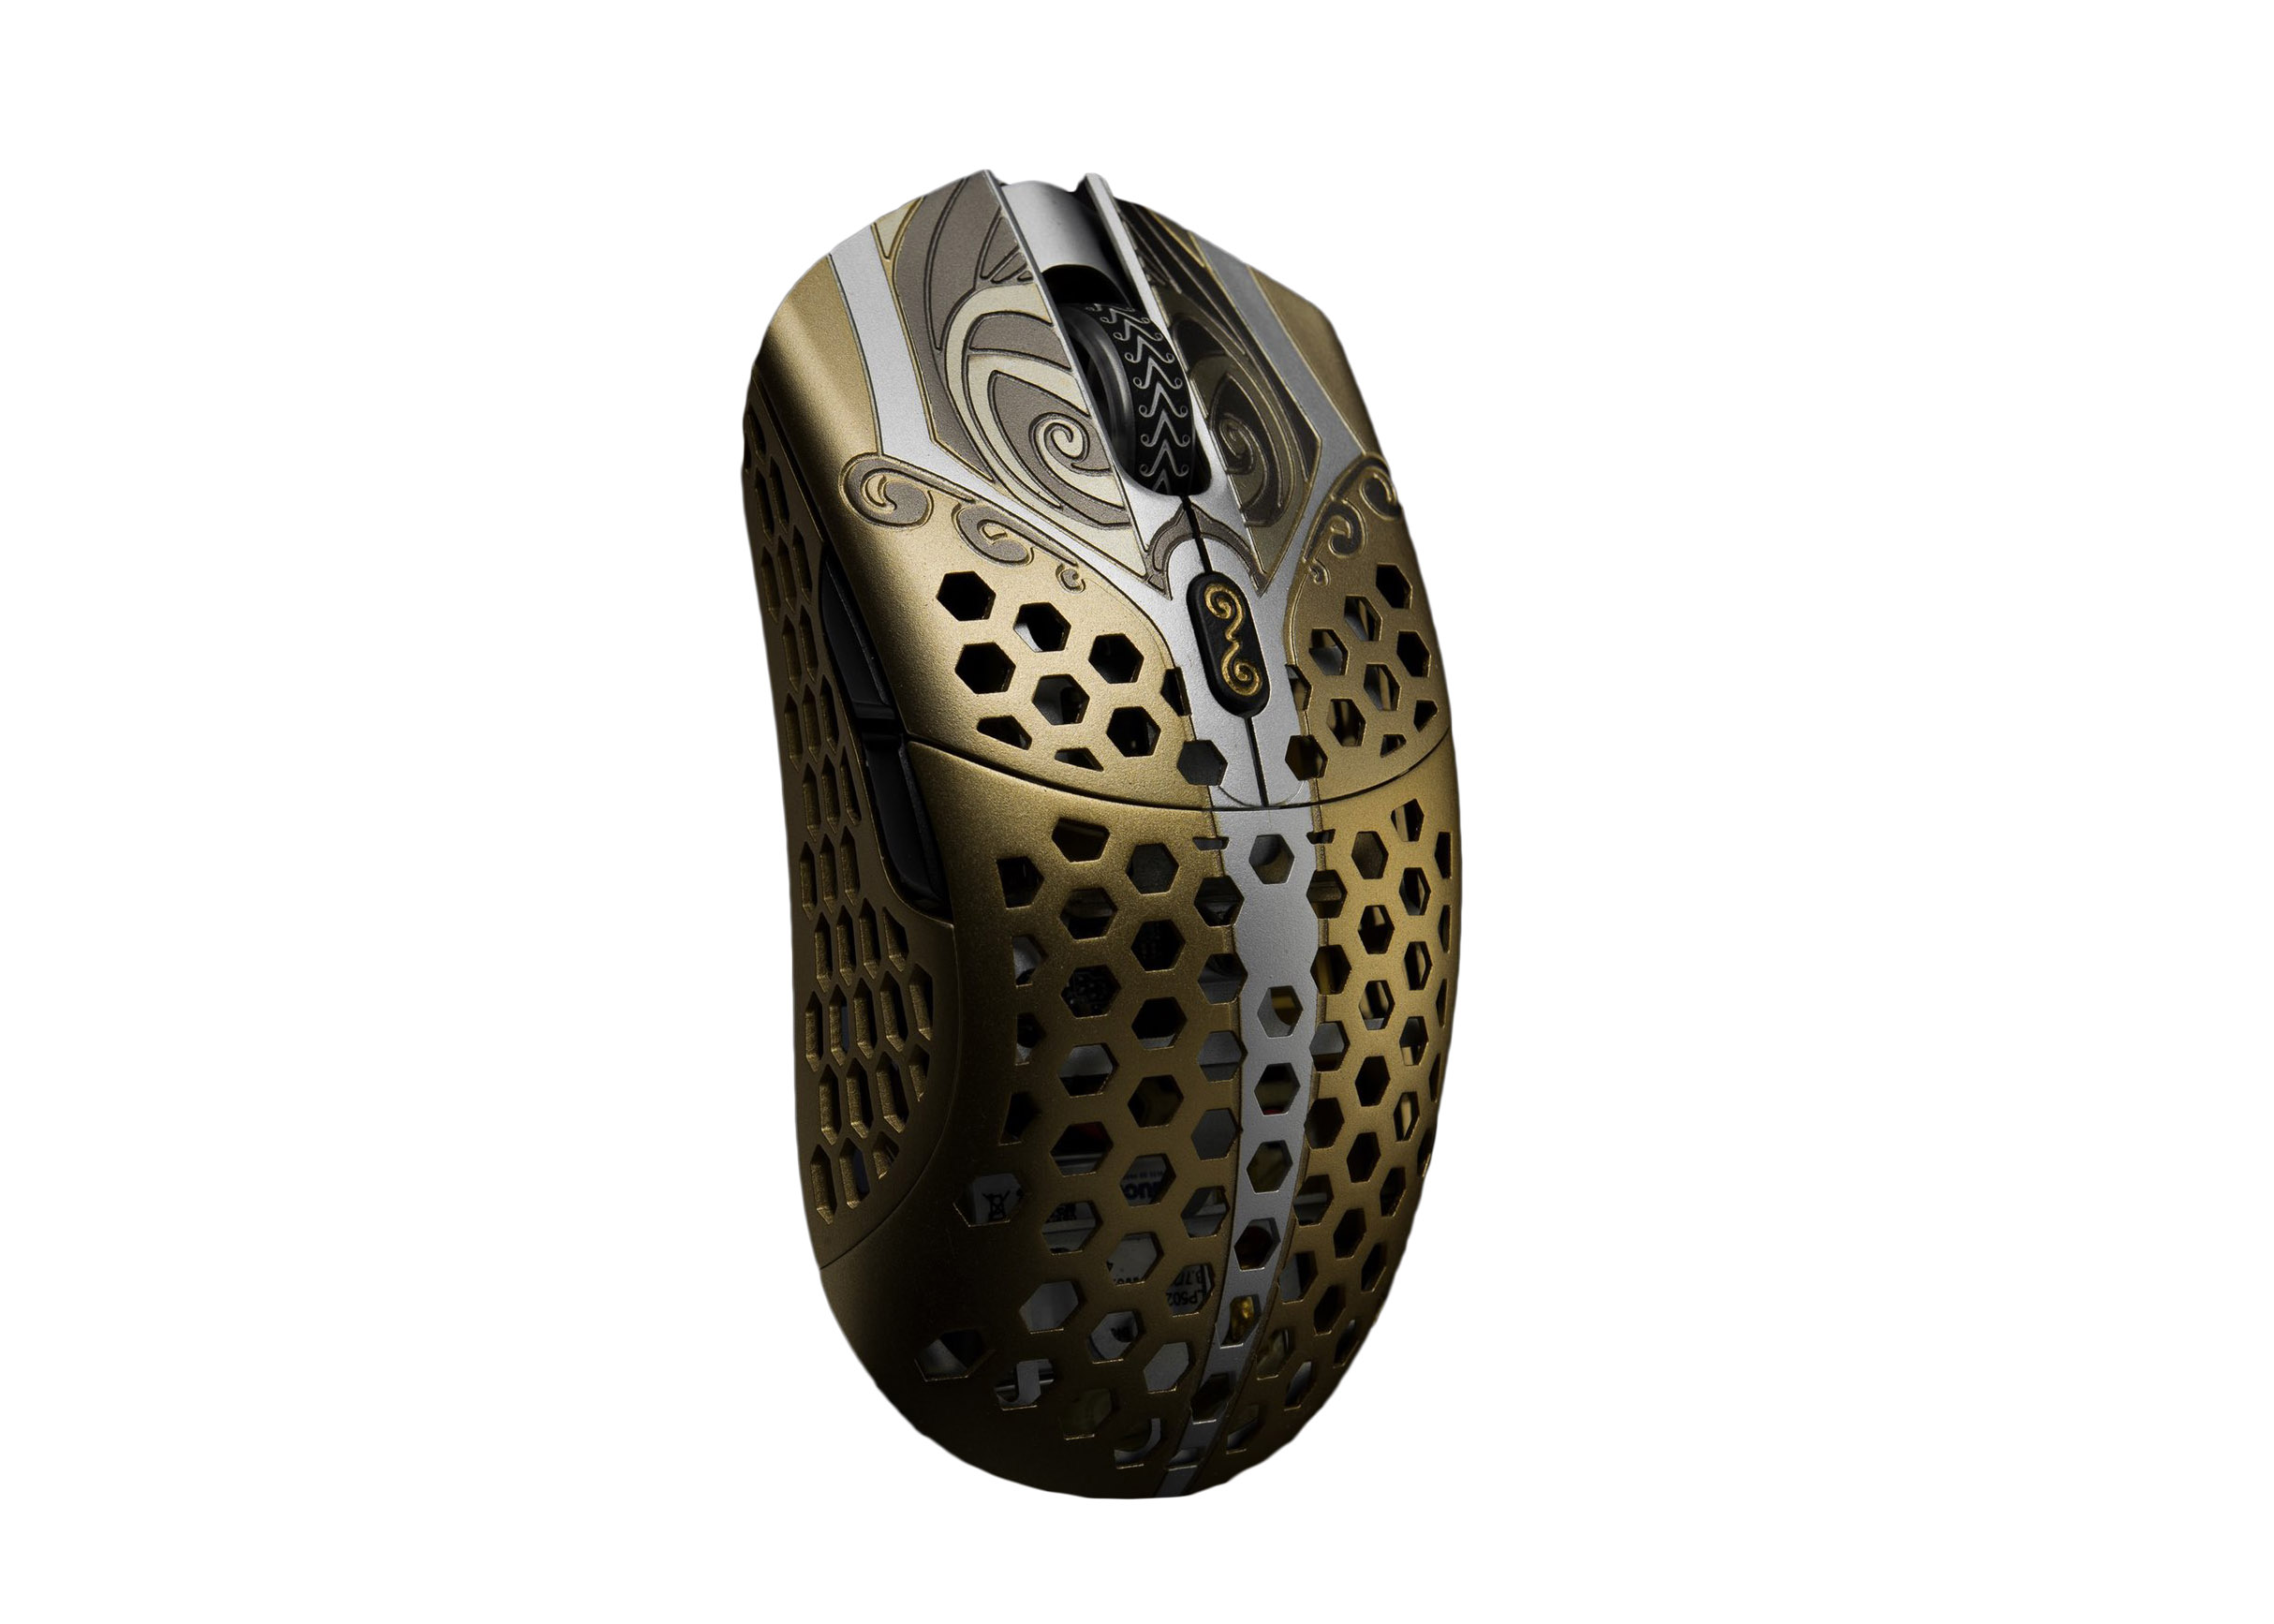 Finalmouse Starlight-12 Wireless Mouse Small Achilles Hero of Troy